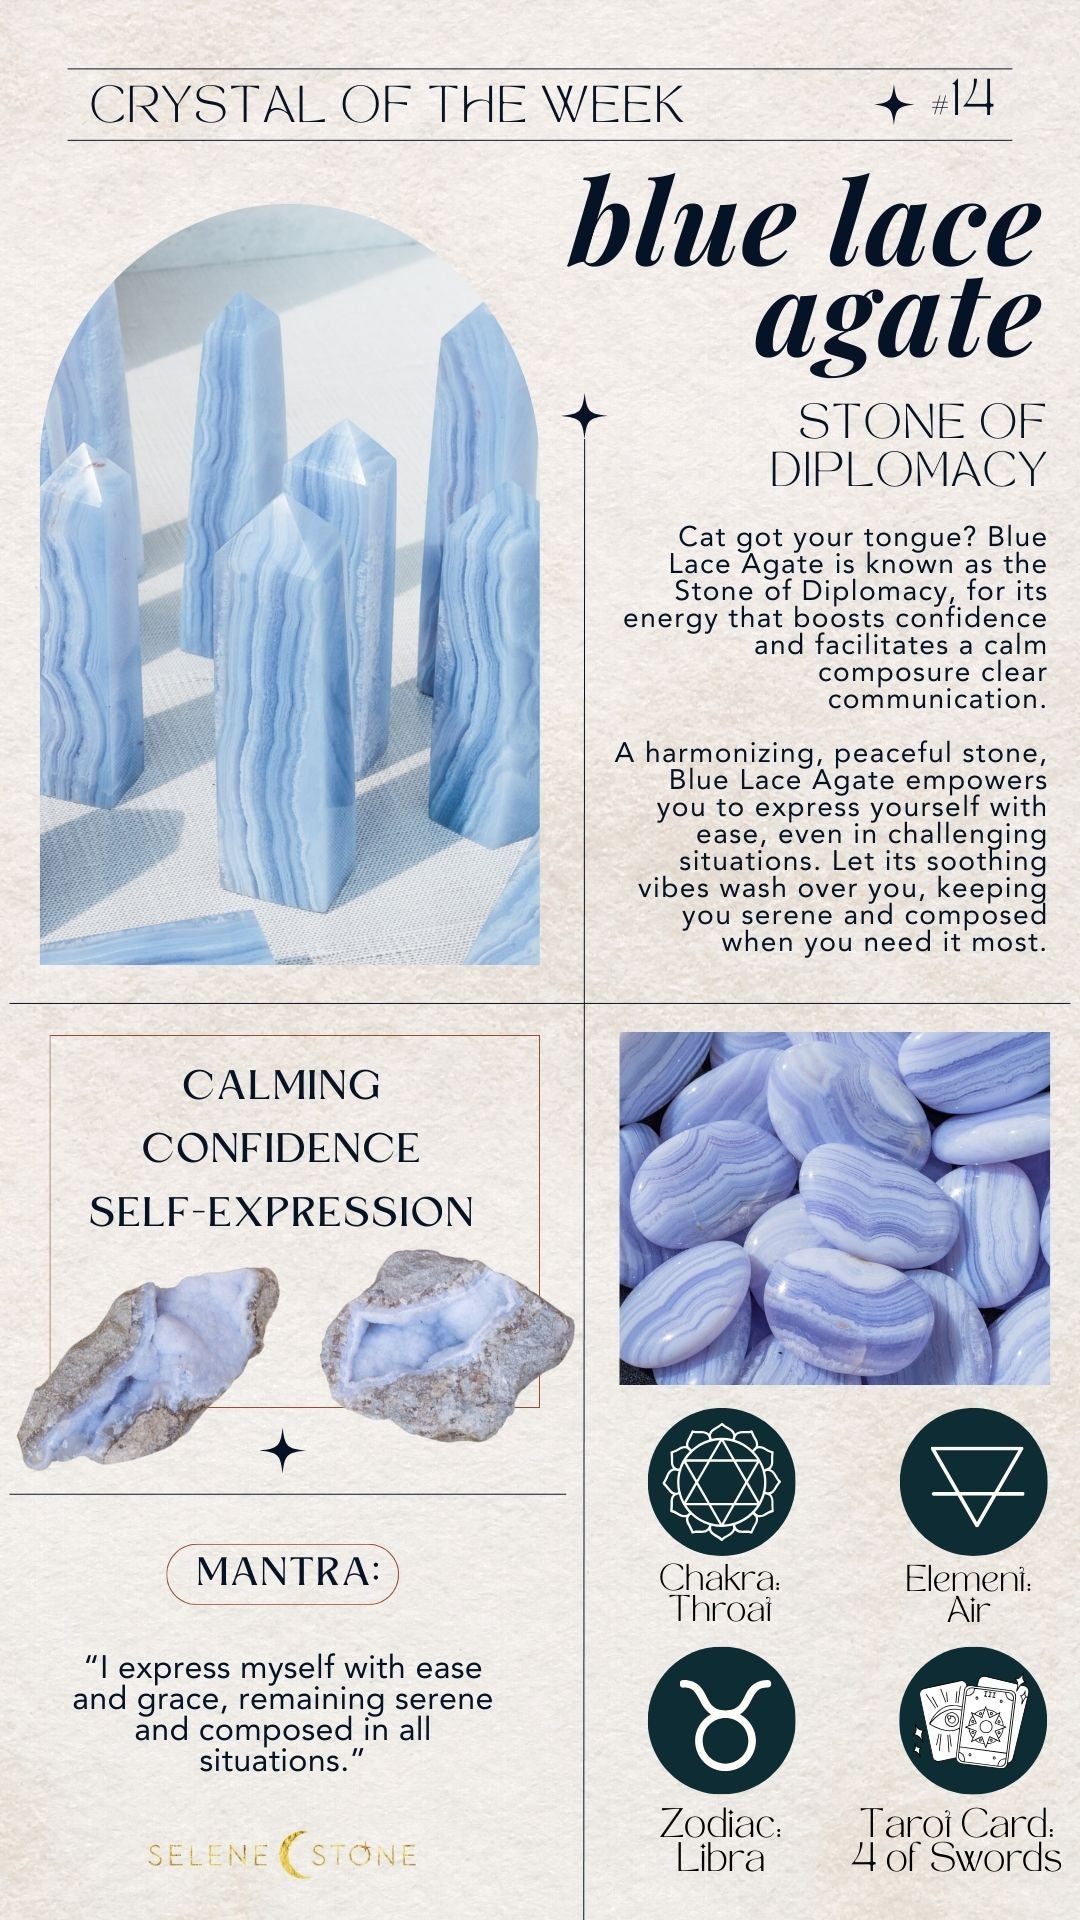 infographic shows blue lace agate crystals and blue lace agate healing properties